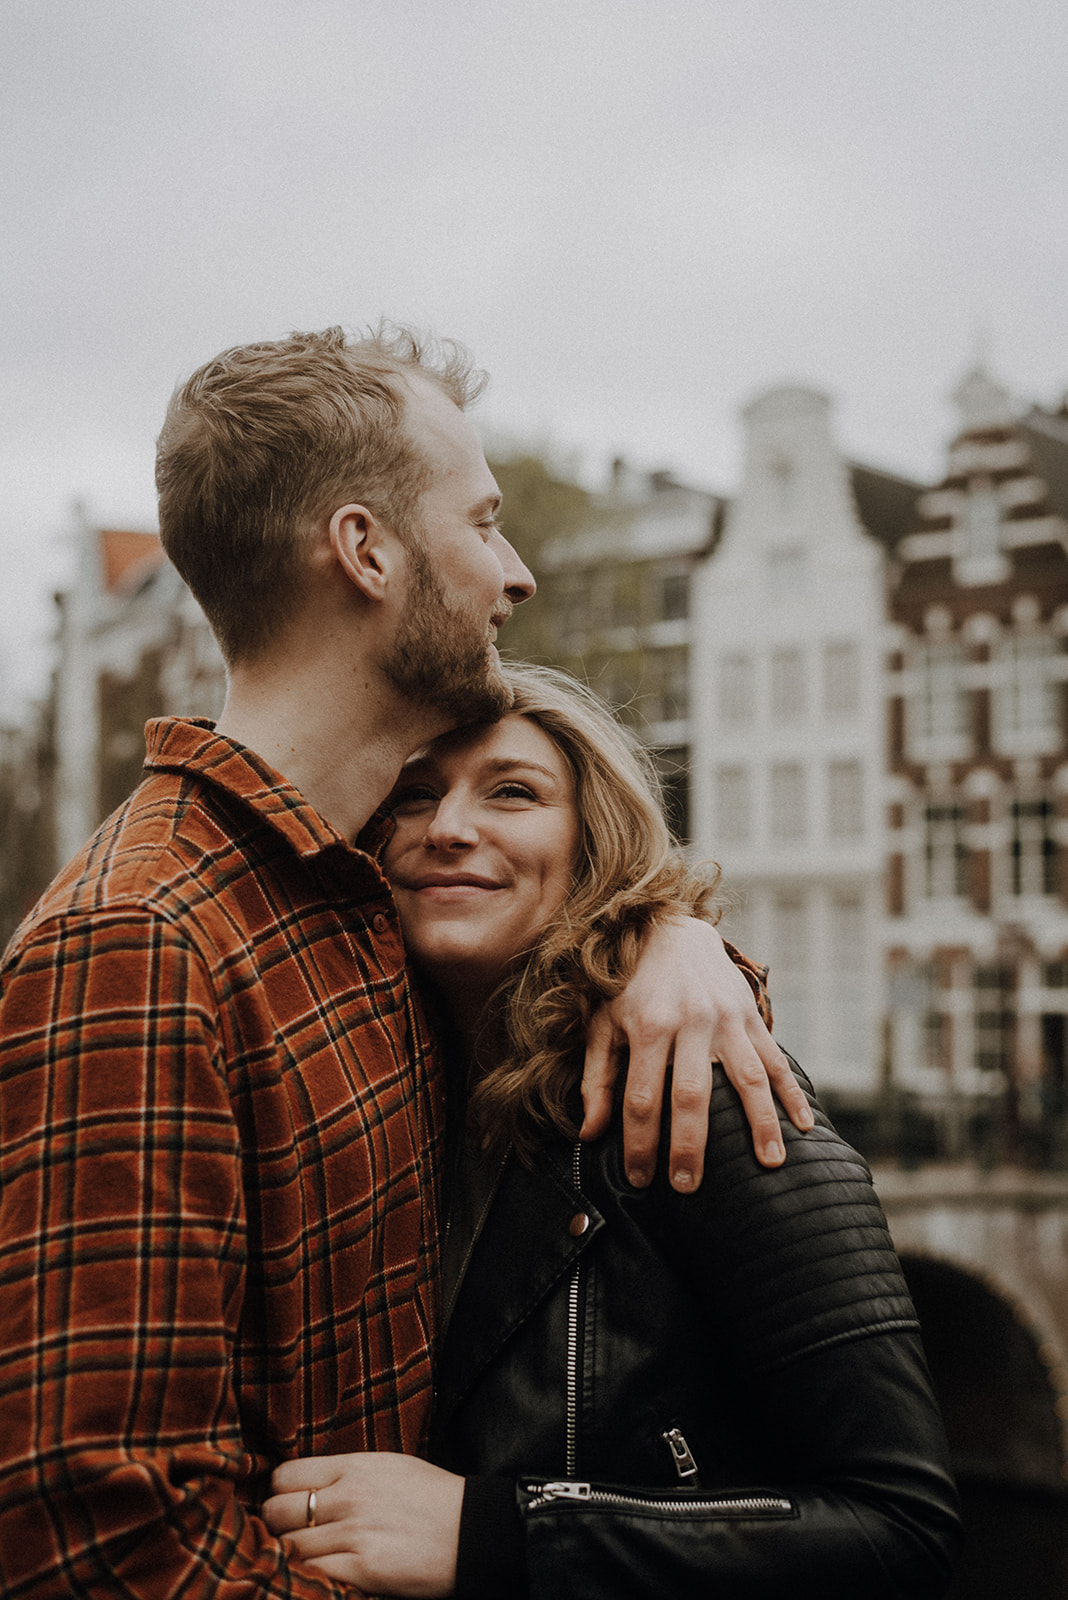 Historic Amsterdam buildings in background of maternity session photos